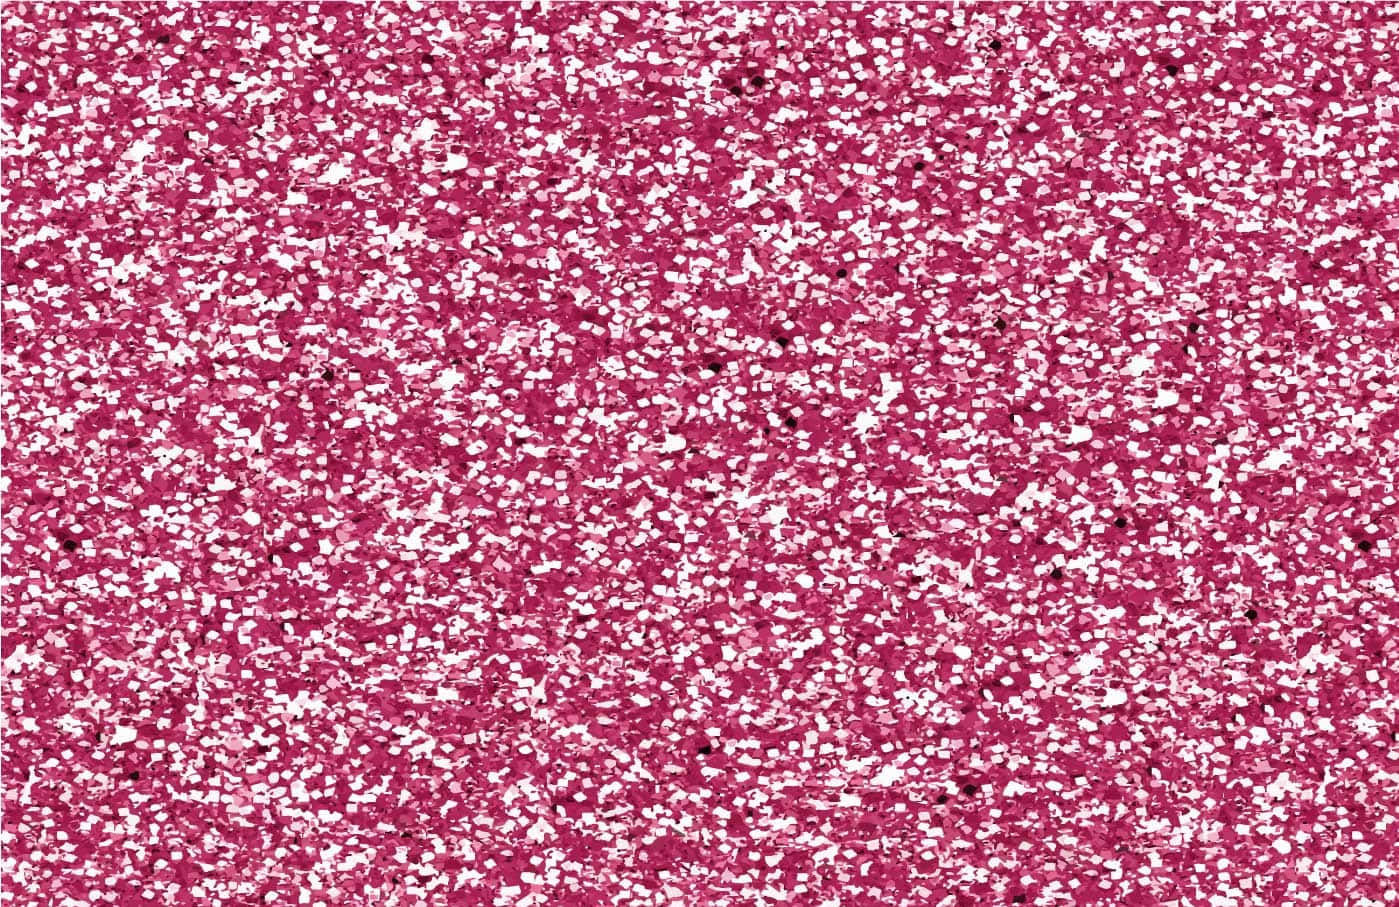 Glittering and Elegant Pink Sparkly Background